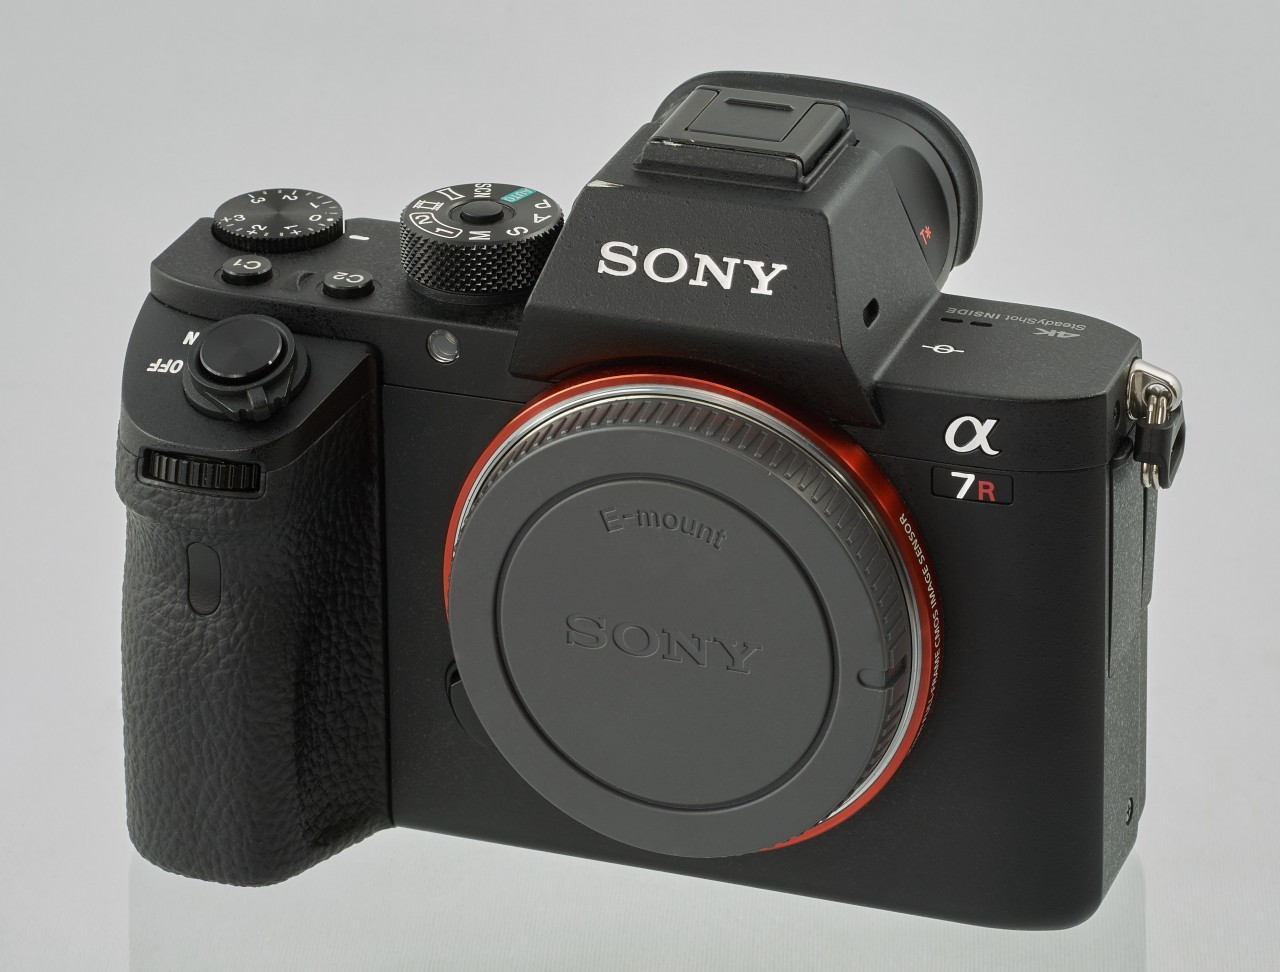 The mirrorless camera with the highest resolution